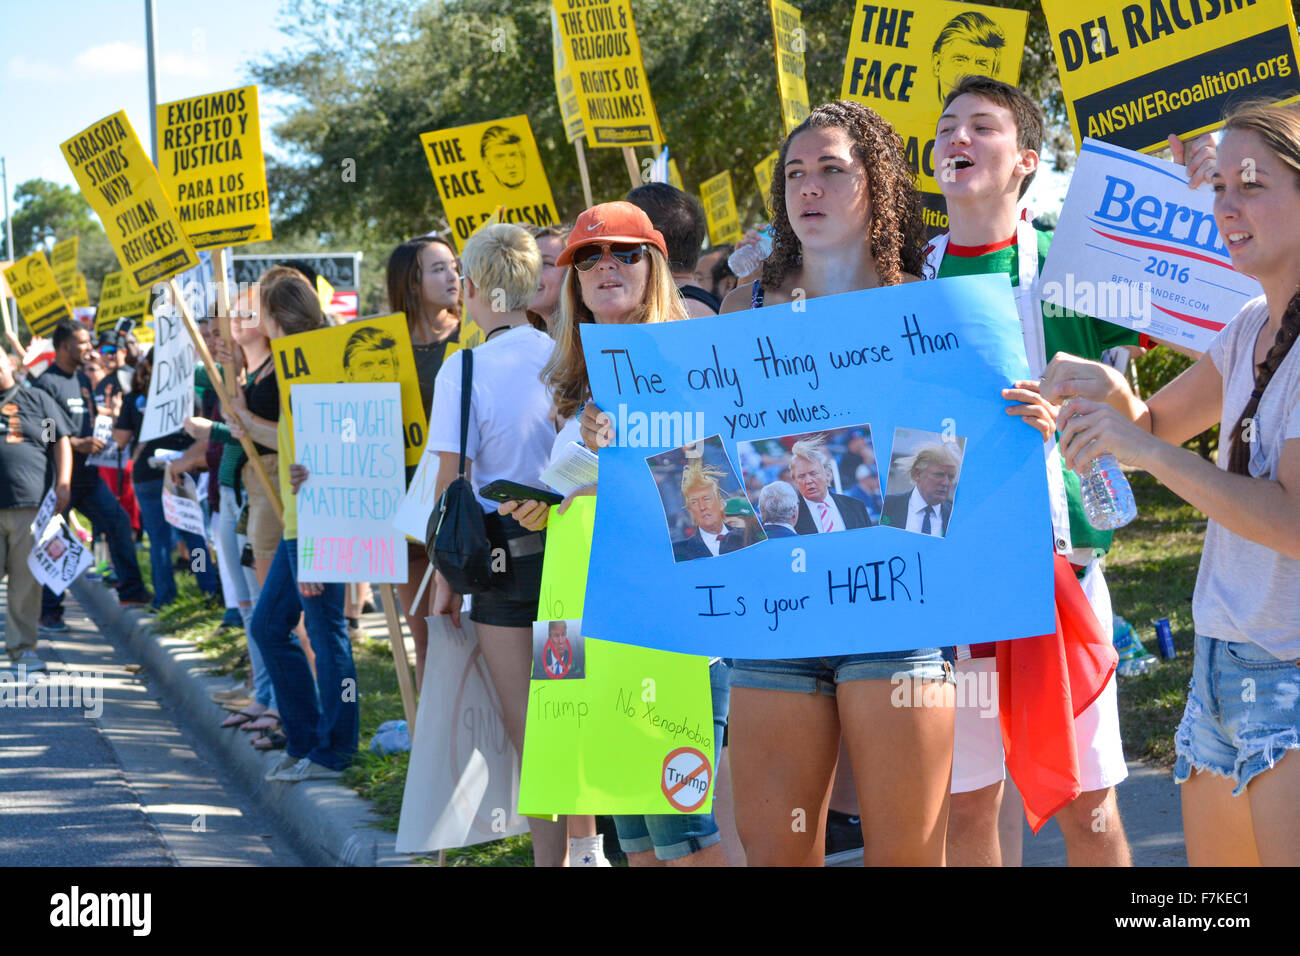 Protesters holding signs denouncing Donald Trump at a political rally for Trump in Sarasota, FL, USA Stock Photo